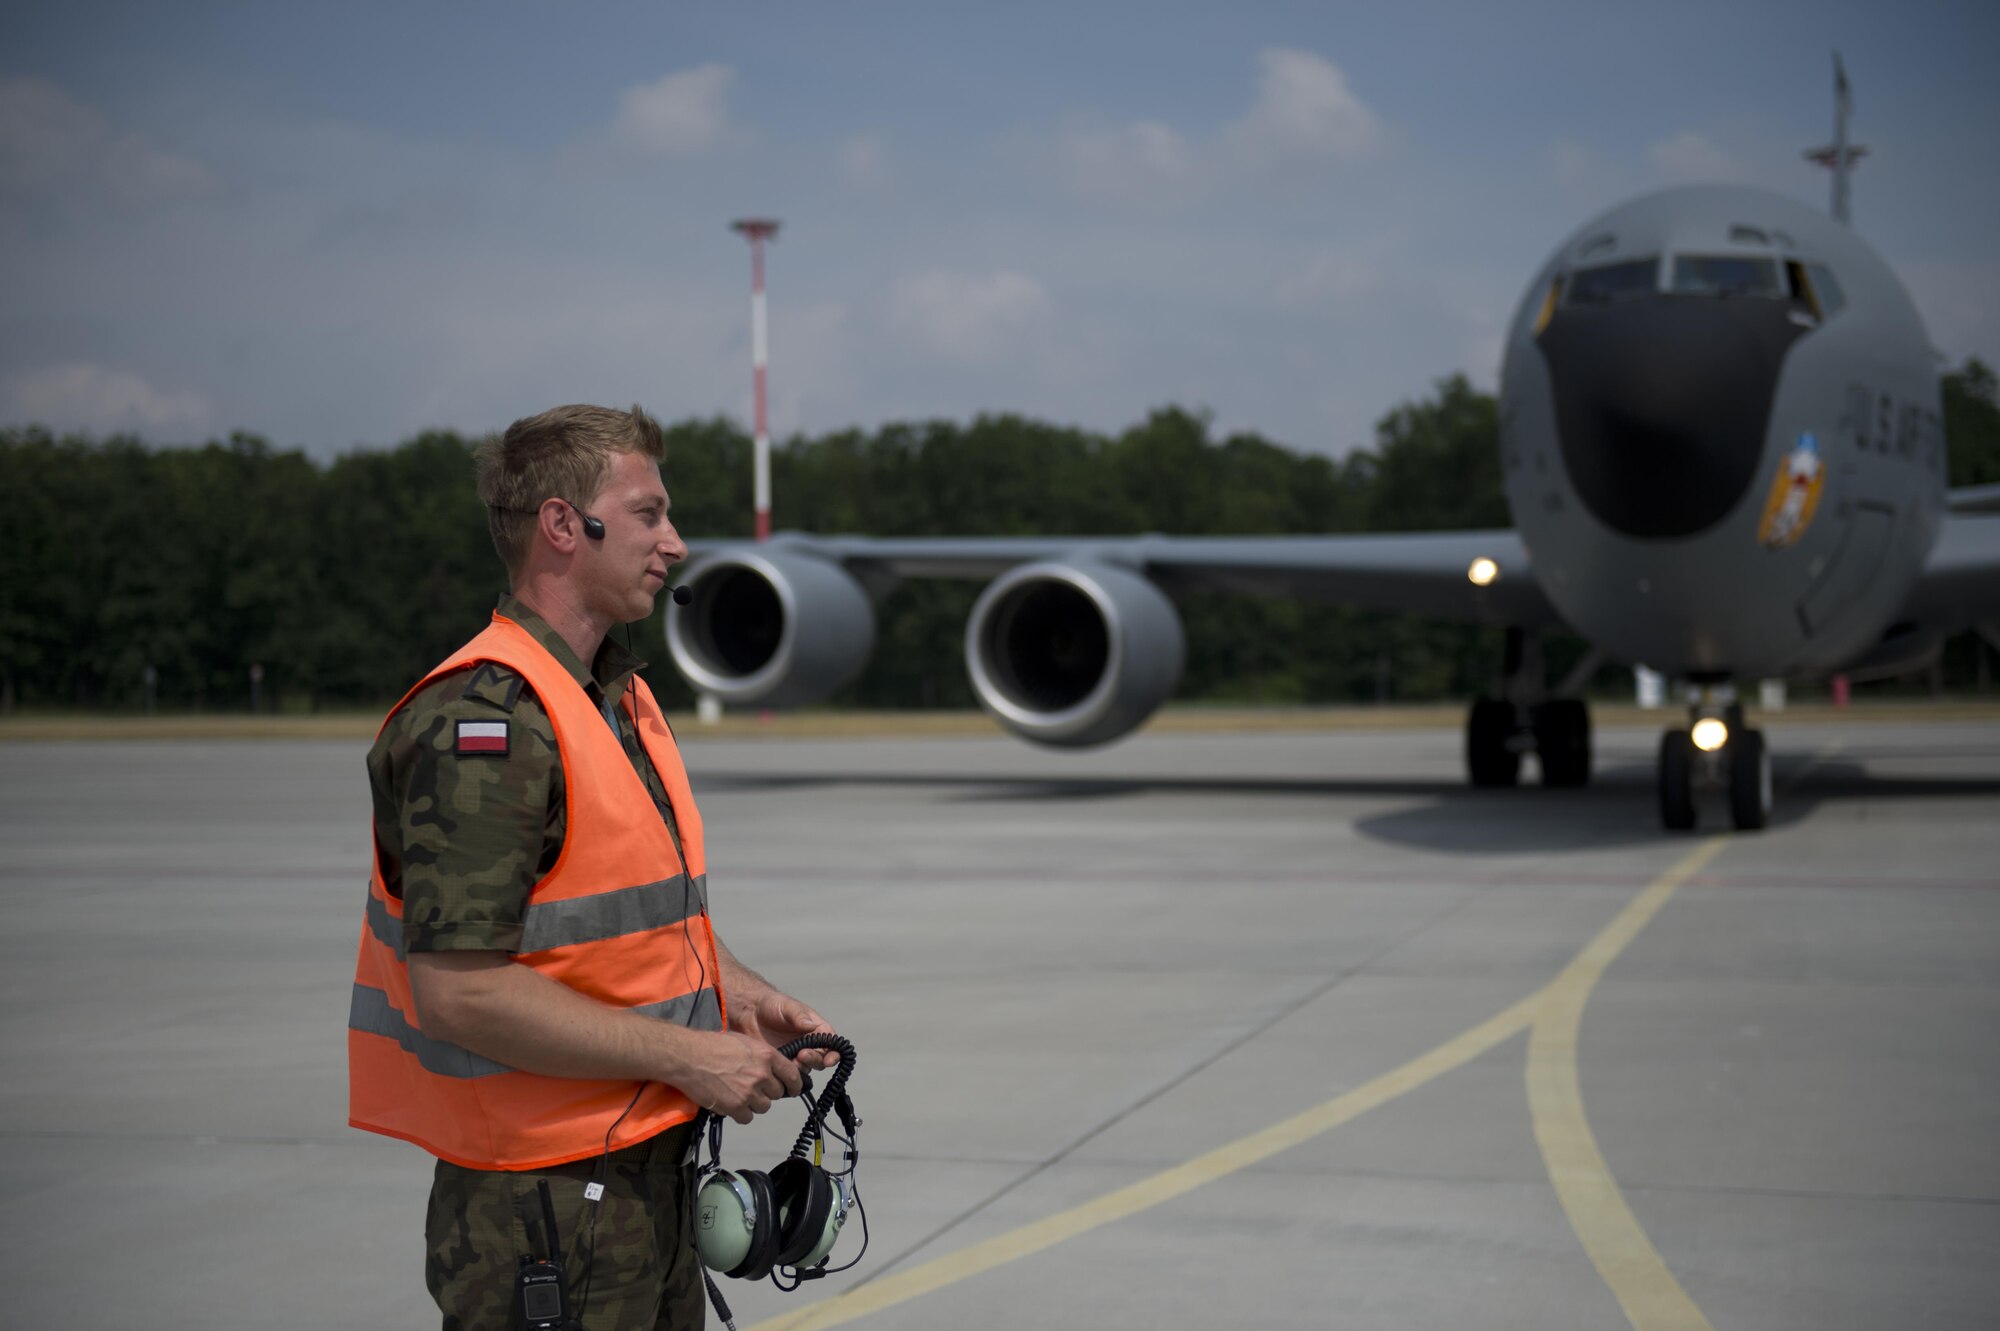 A Polish air force service member removes his headset after marshaling a KC-135 from the 100th Air Refueling Wing, England, in preparation for exercise Baltic Operations 2016 at Powidz Air Base, Poland, June 2, 2016. Fifteen NATO and two partner nations will participate in the 44th iteration of the multinational maritime exercise BALTOPS 2016 in Estonia, Finland, Germany, Poland, Sweden, and throughout the Baltic Sea, June 3-19, 2016. (U.S. Air Force photo by Senior Airman Erin Babis/Released)